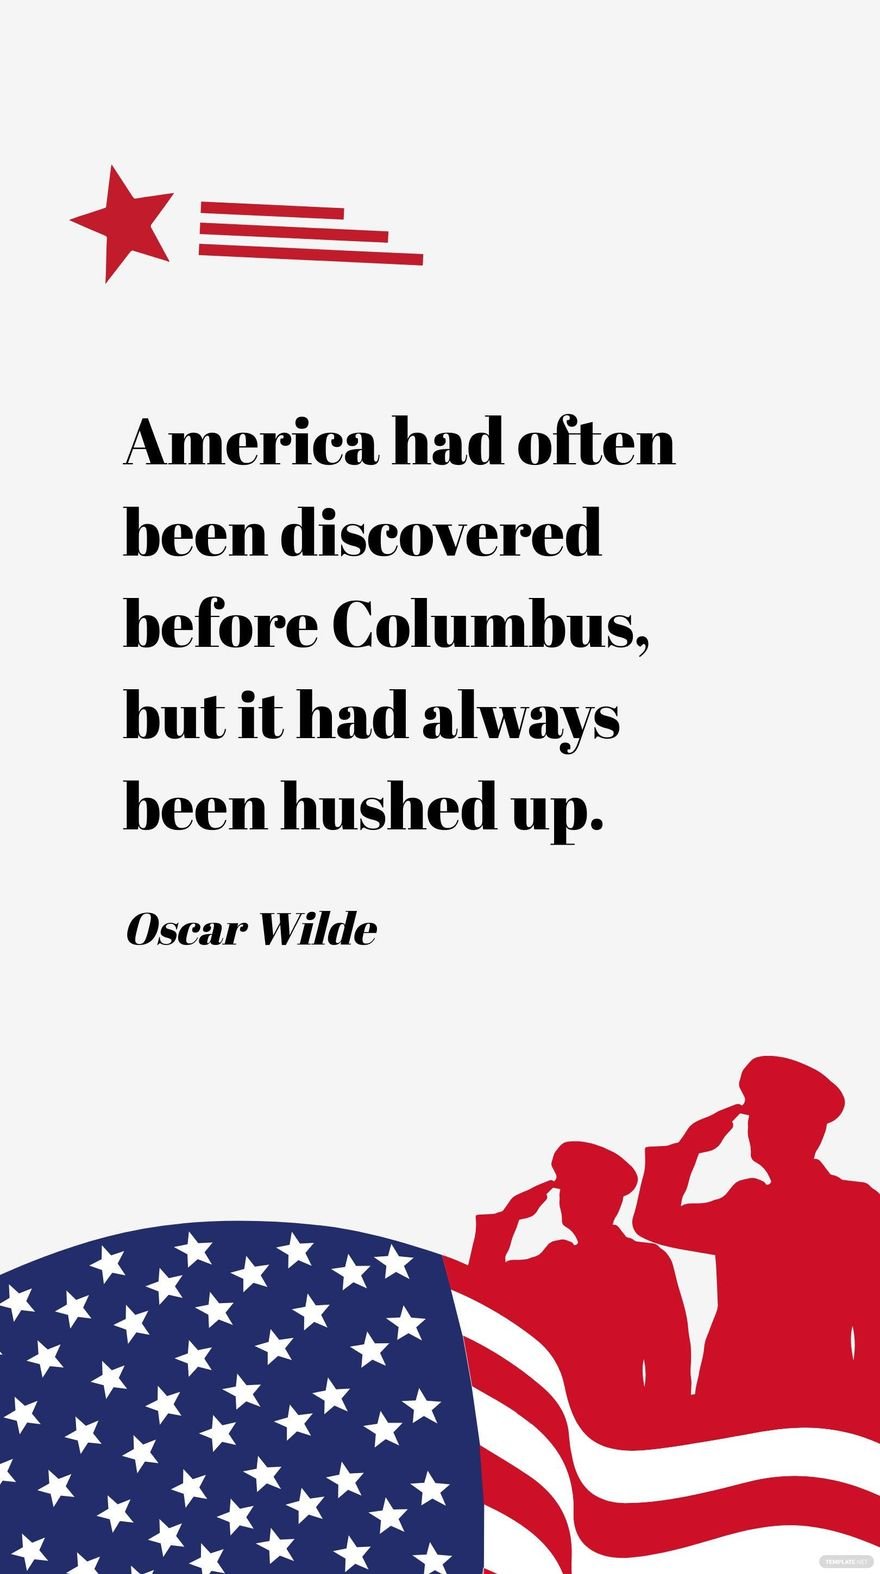 Oscar Wilde- America had often been discovered before Columbus, but it had always been hushed up.